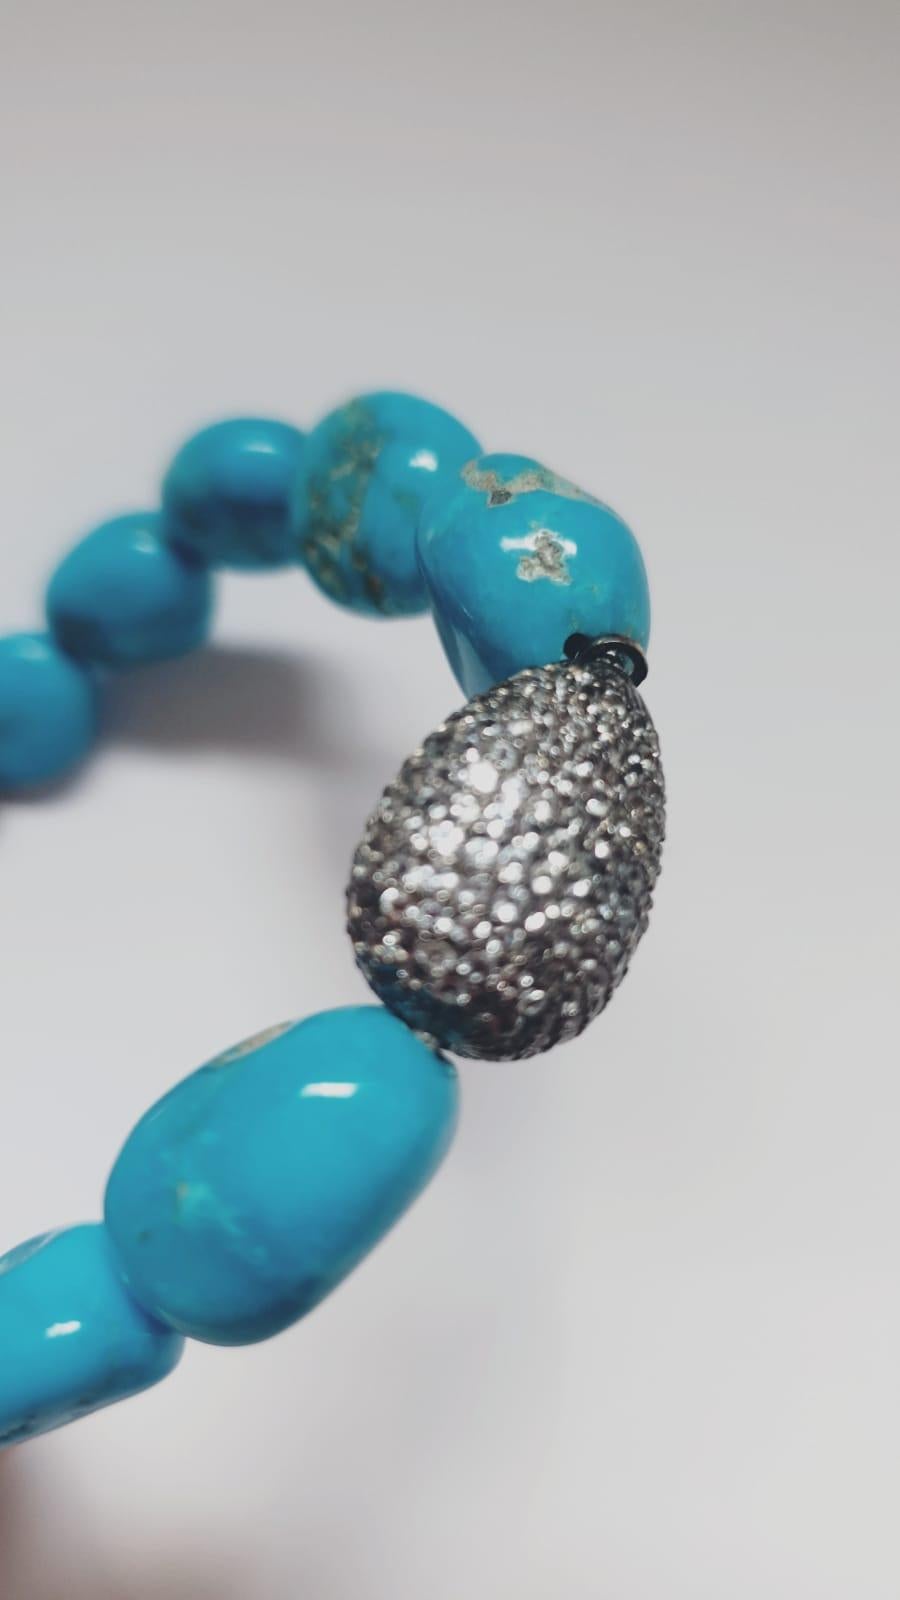 Nice bracelet made up of  sky topaz pave on silver setting, natural turquoise beads and macrame clasp. 
Sky Topaz pave ct. 3,75
Natural turquoise beads
macrame clasp system
Total diameter cm 7 - it fits well for a medium wrist ( about 15-16 cm) 